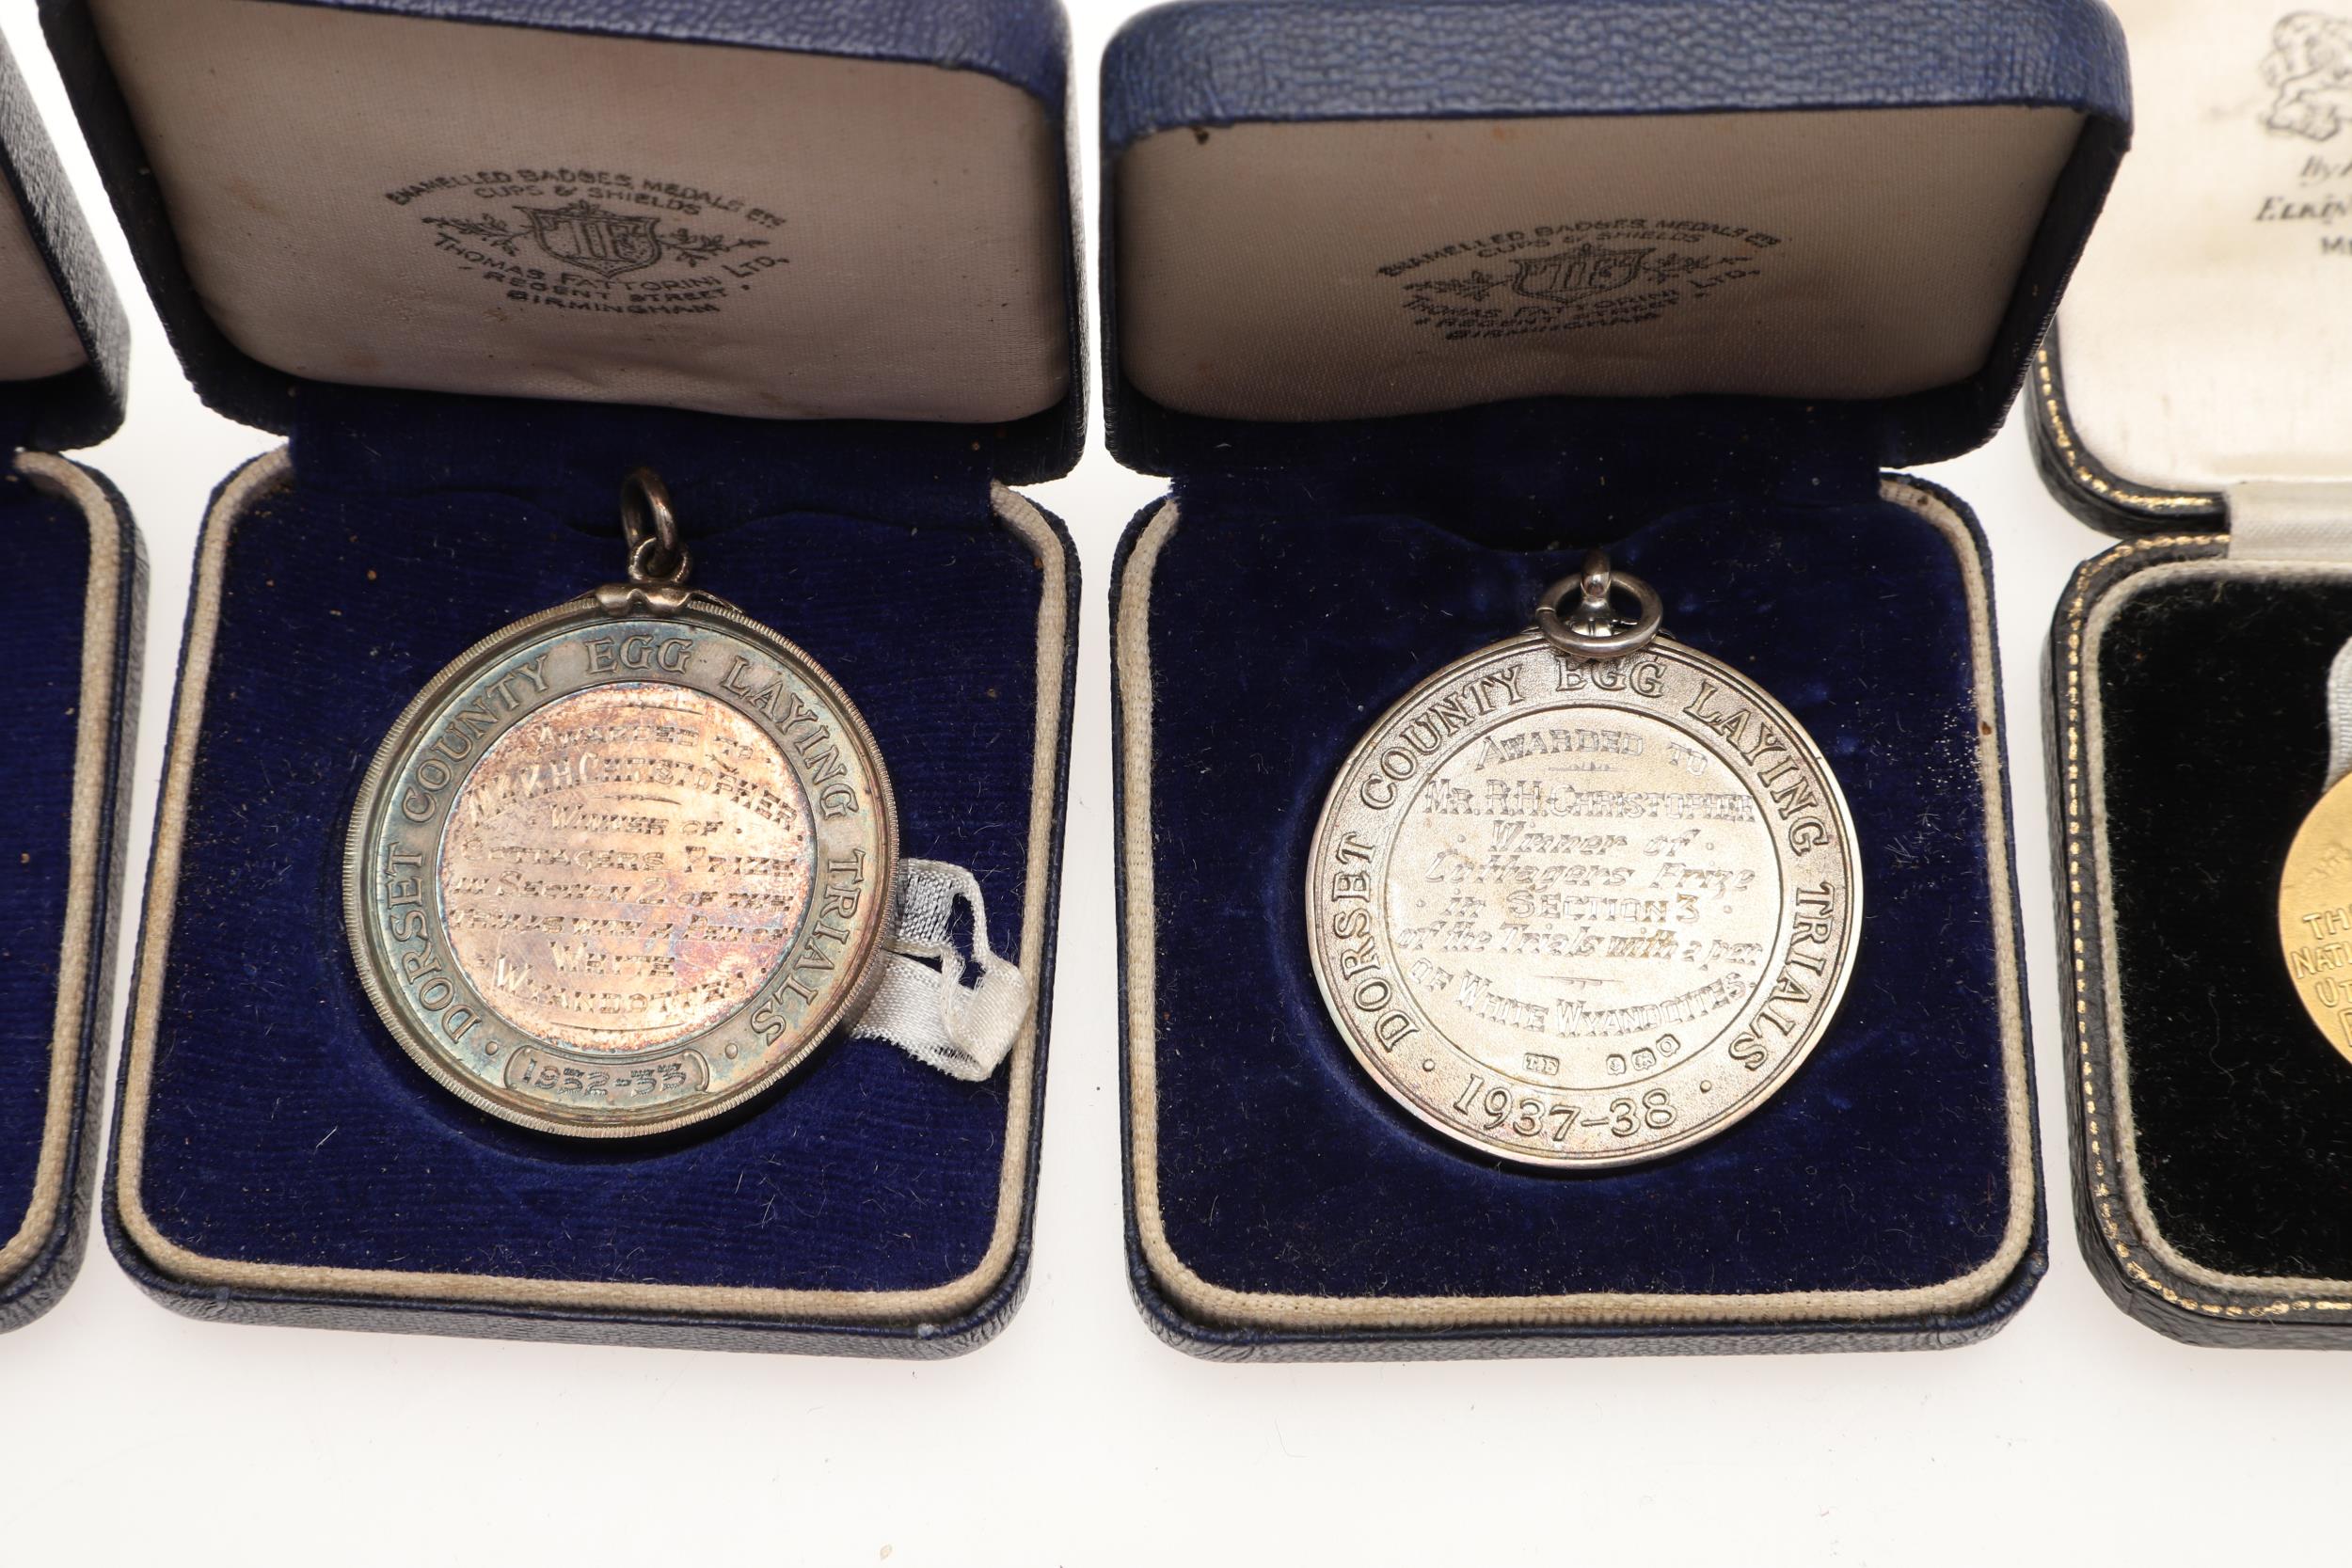 AN EXTENSIVE COLLECTION OF GOLD, SILVER AND BRONZE MEDALS FOR EGG LAYING. - Image 23 of 23